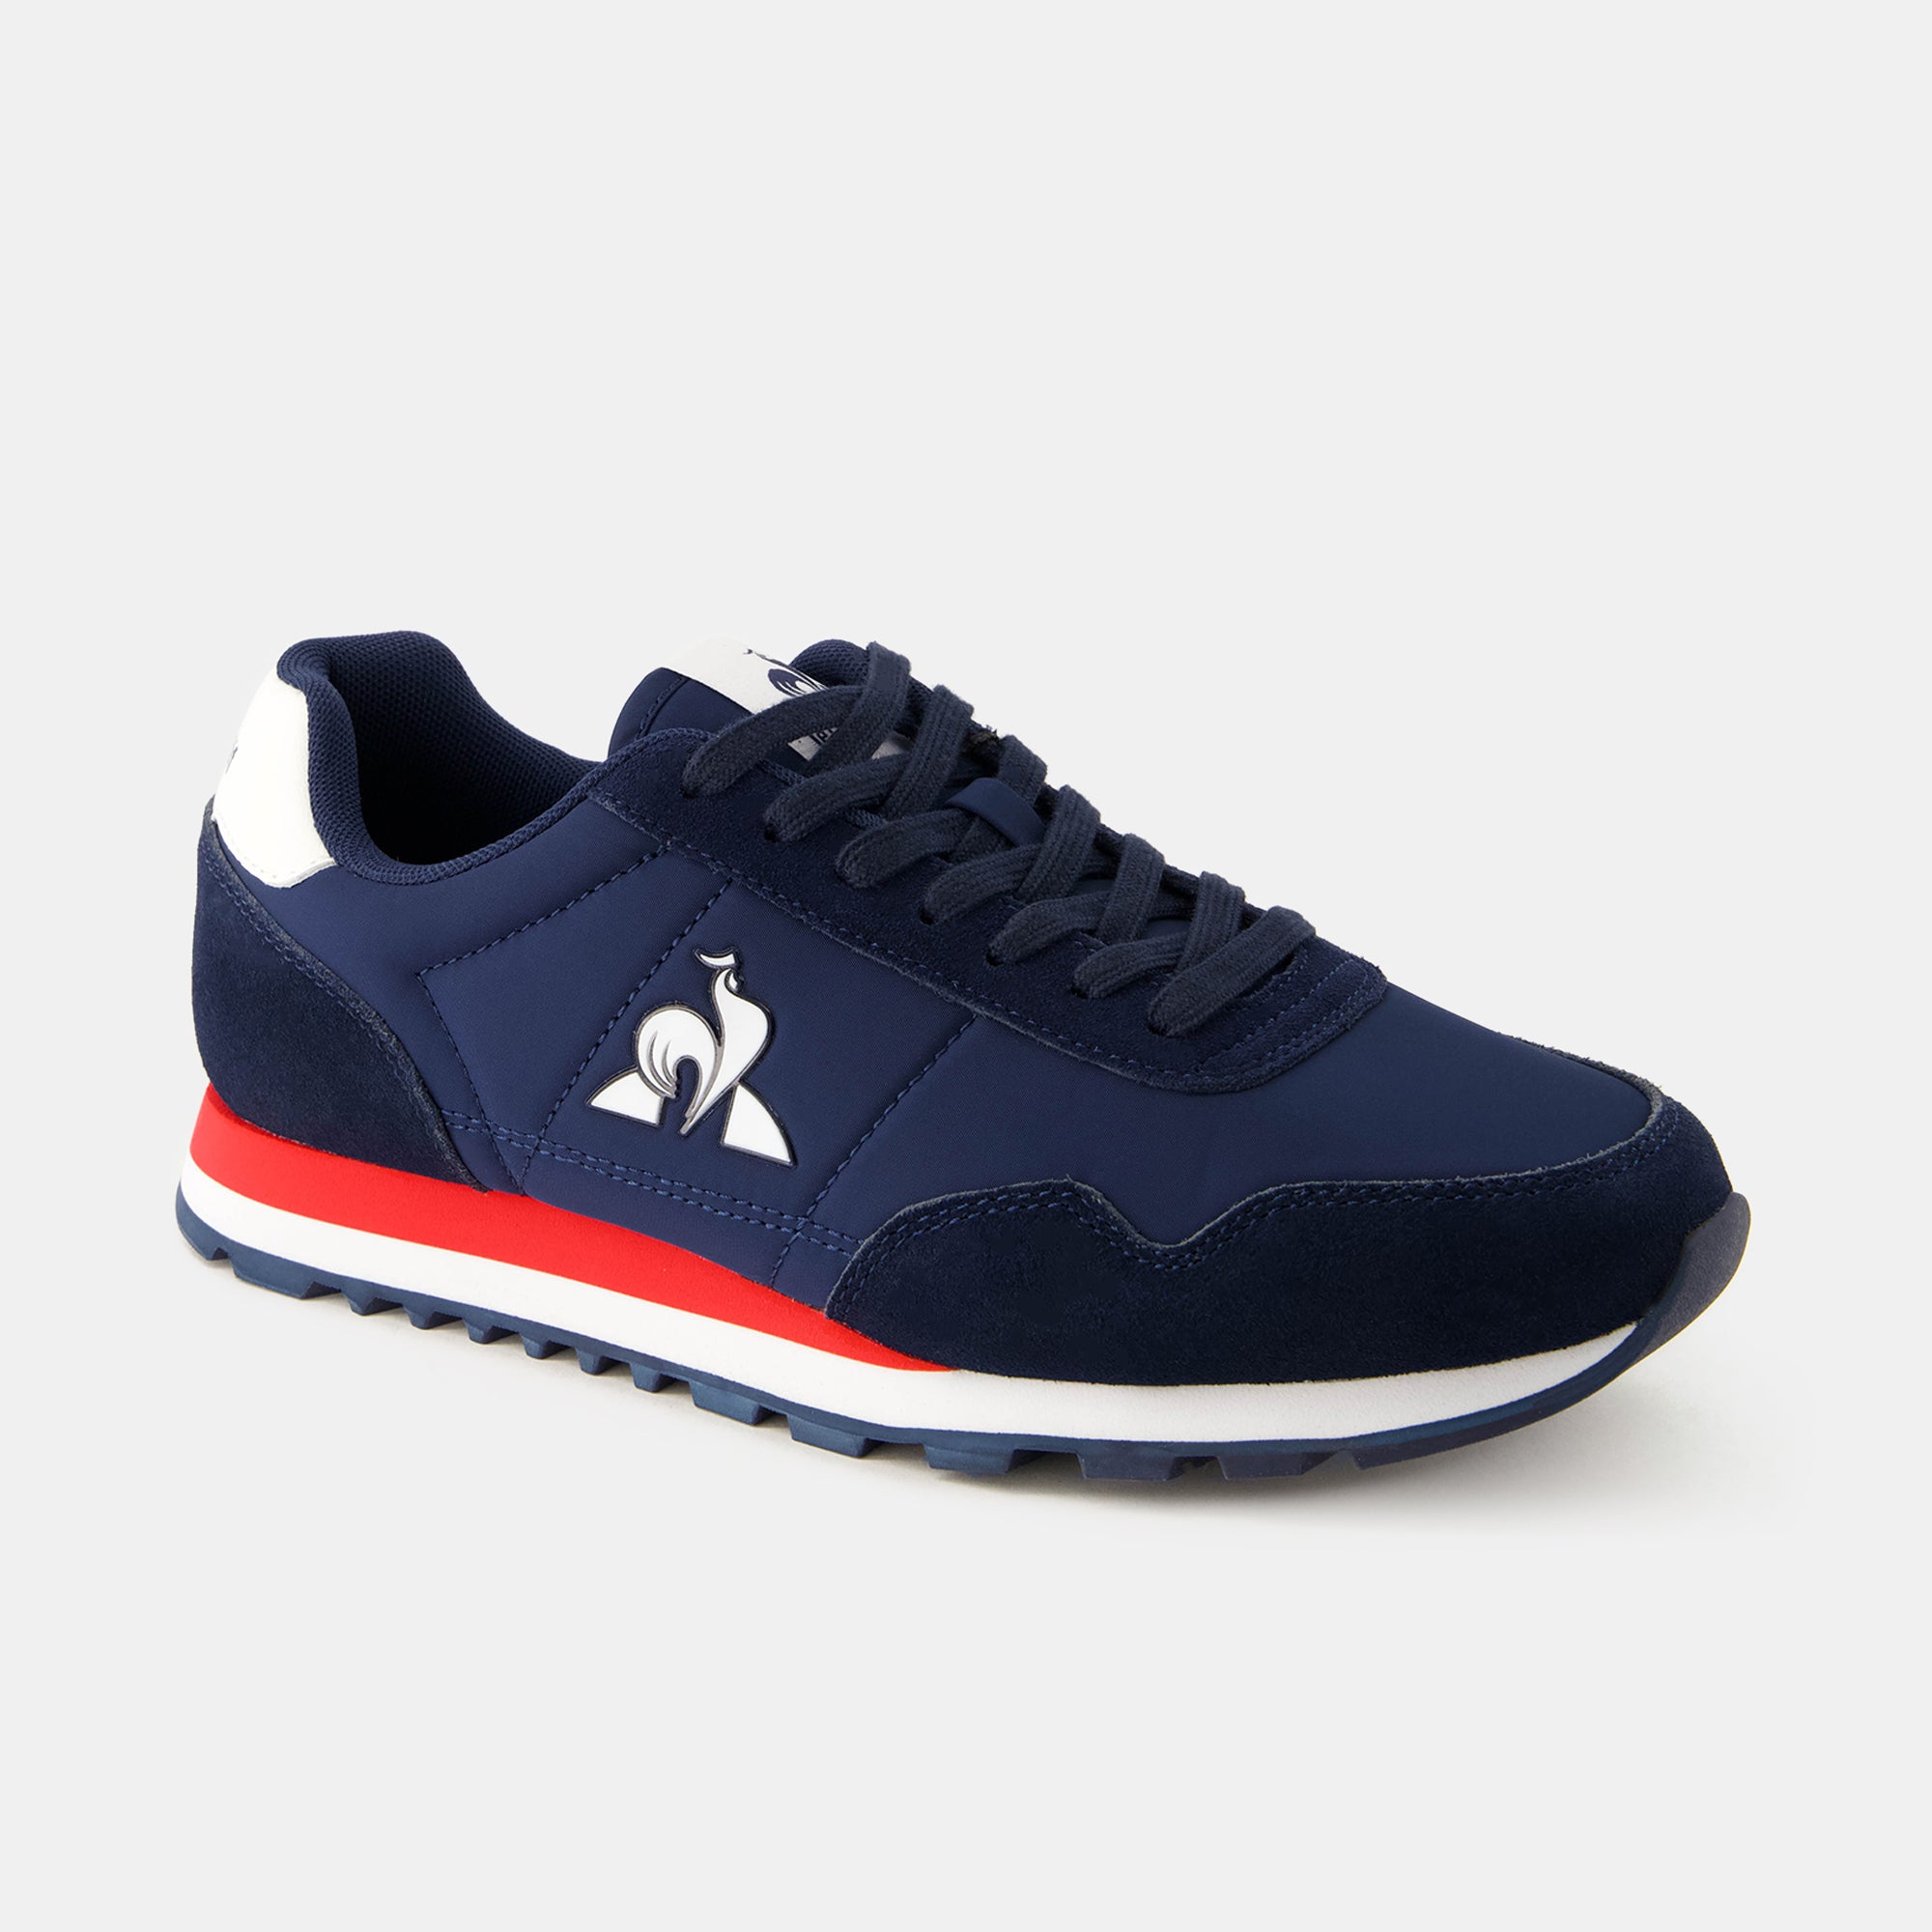 2423234-ASTRA_2 dress blue/fiery red | Chaussures ASTRA_2 Homme